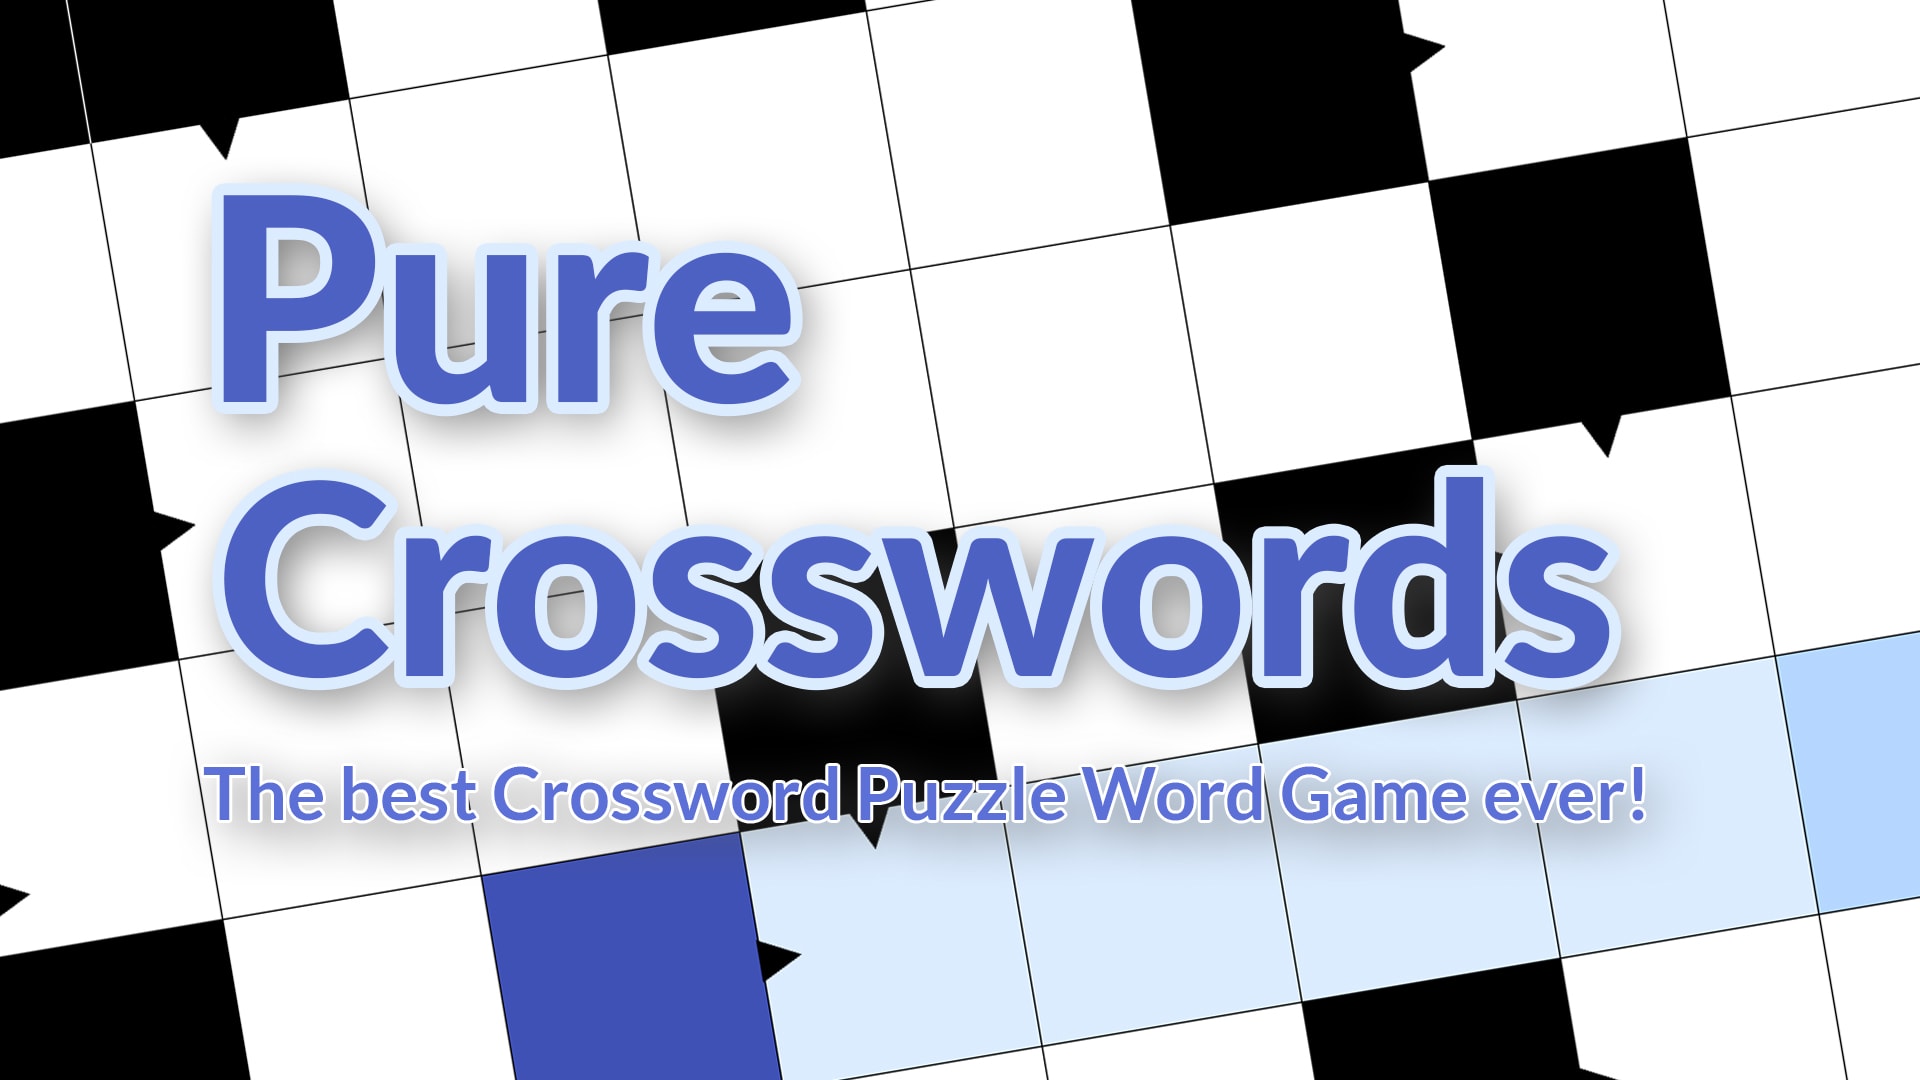 Pure Crosswords - the best Crossword Puzzle Word Game ever! 1